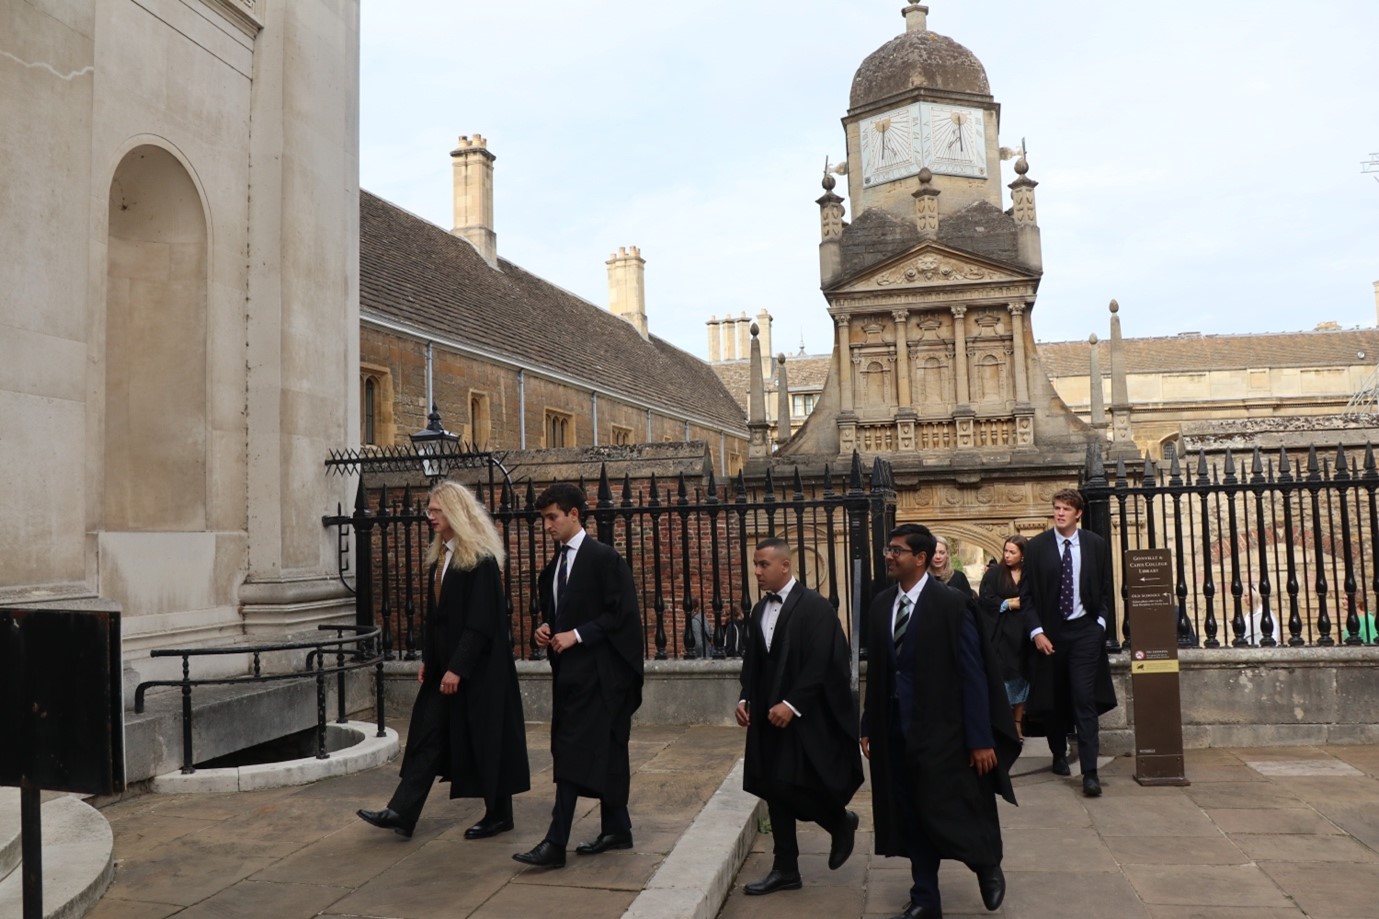 Students in academic gowns walking into their matriculation at Caius